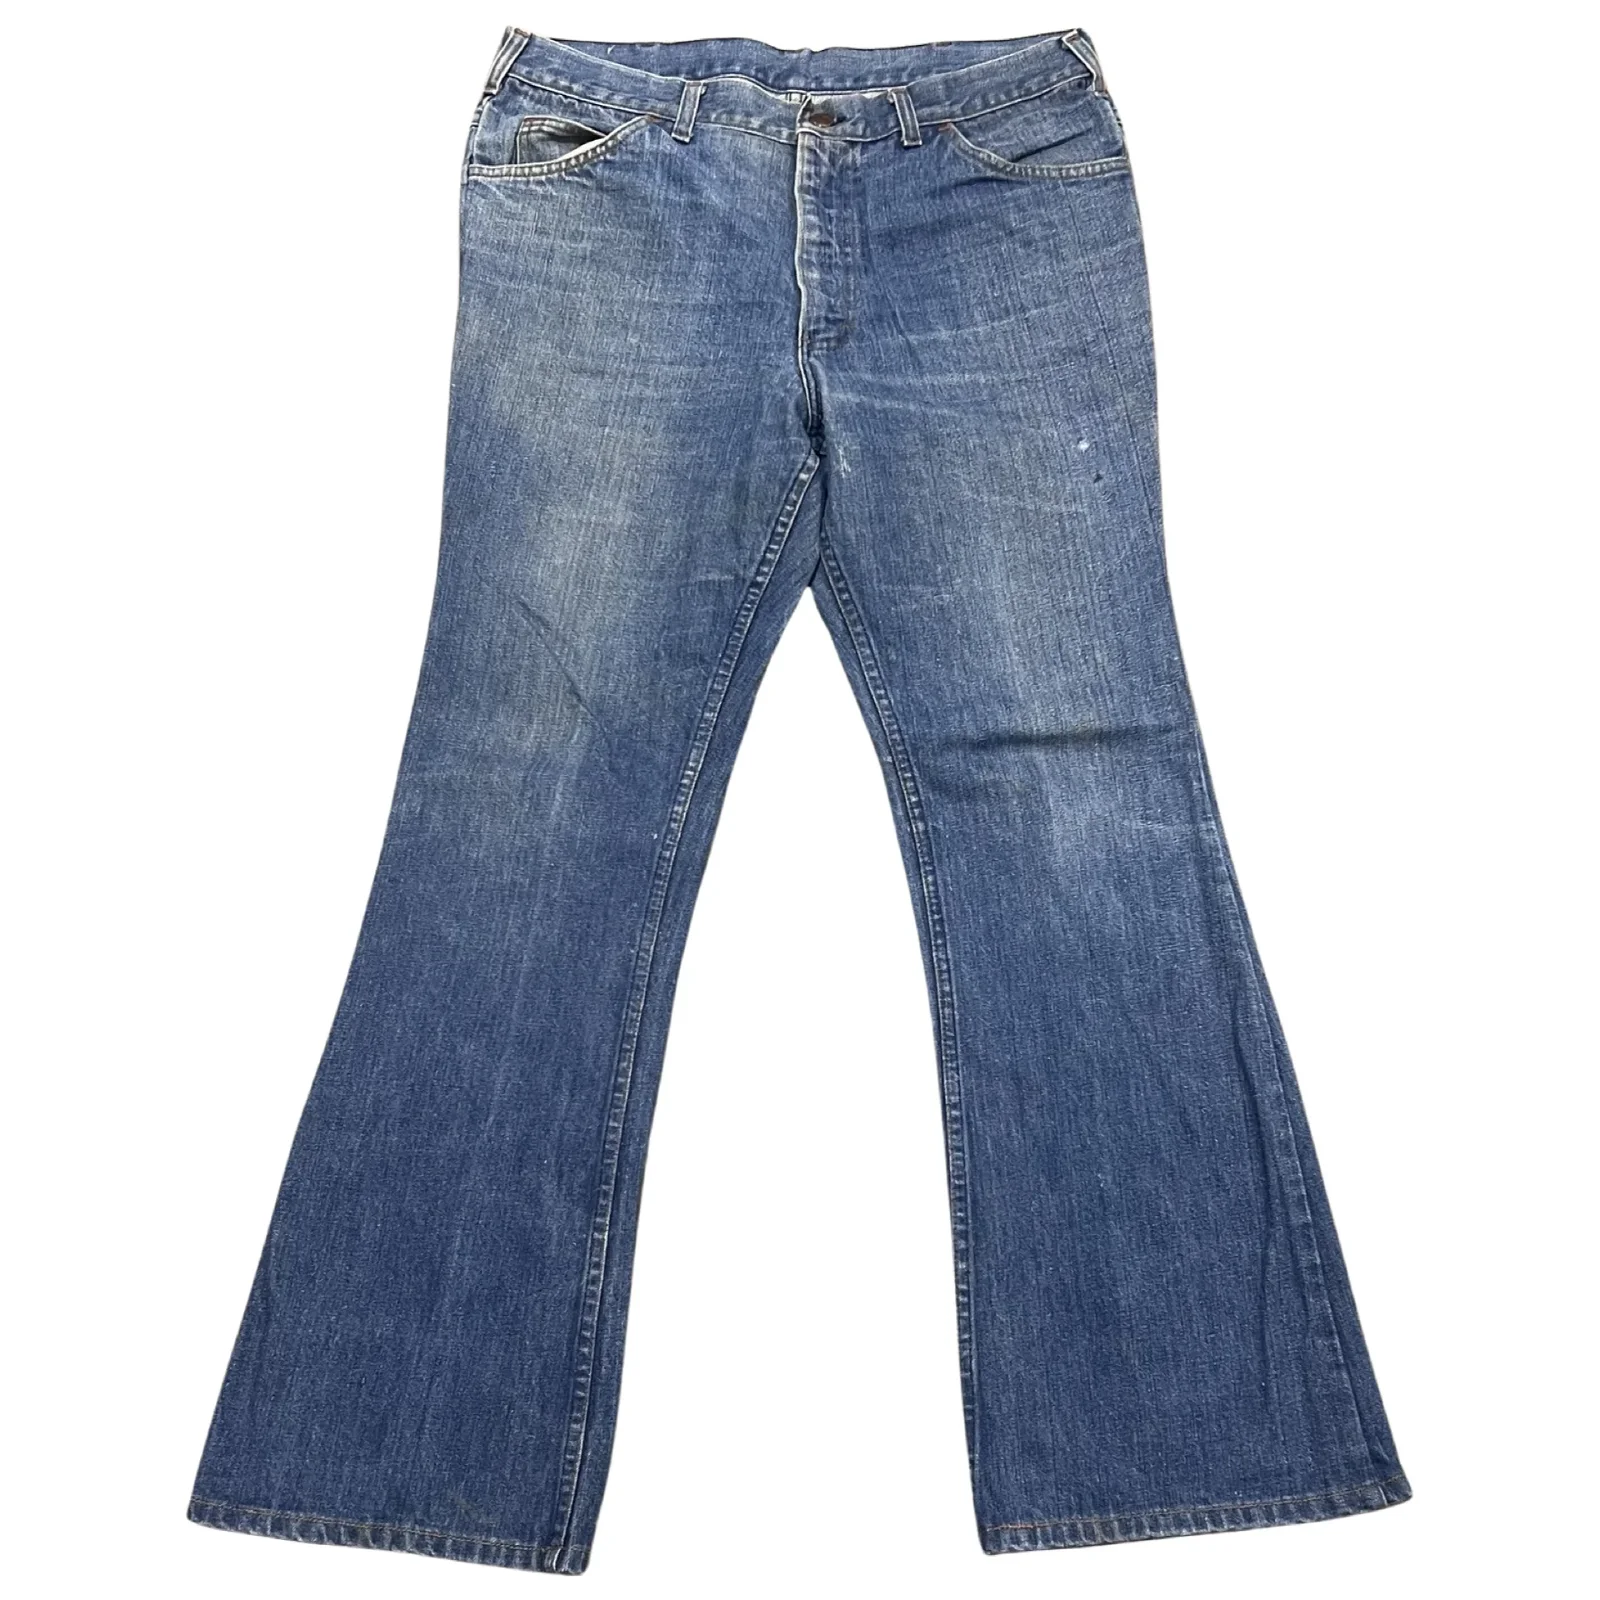 Image of Vintage 70's Big Smith Bootcut Jeans (35x30)